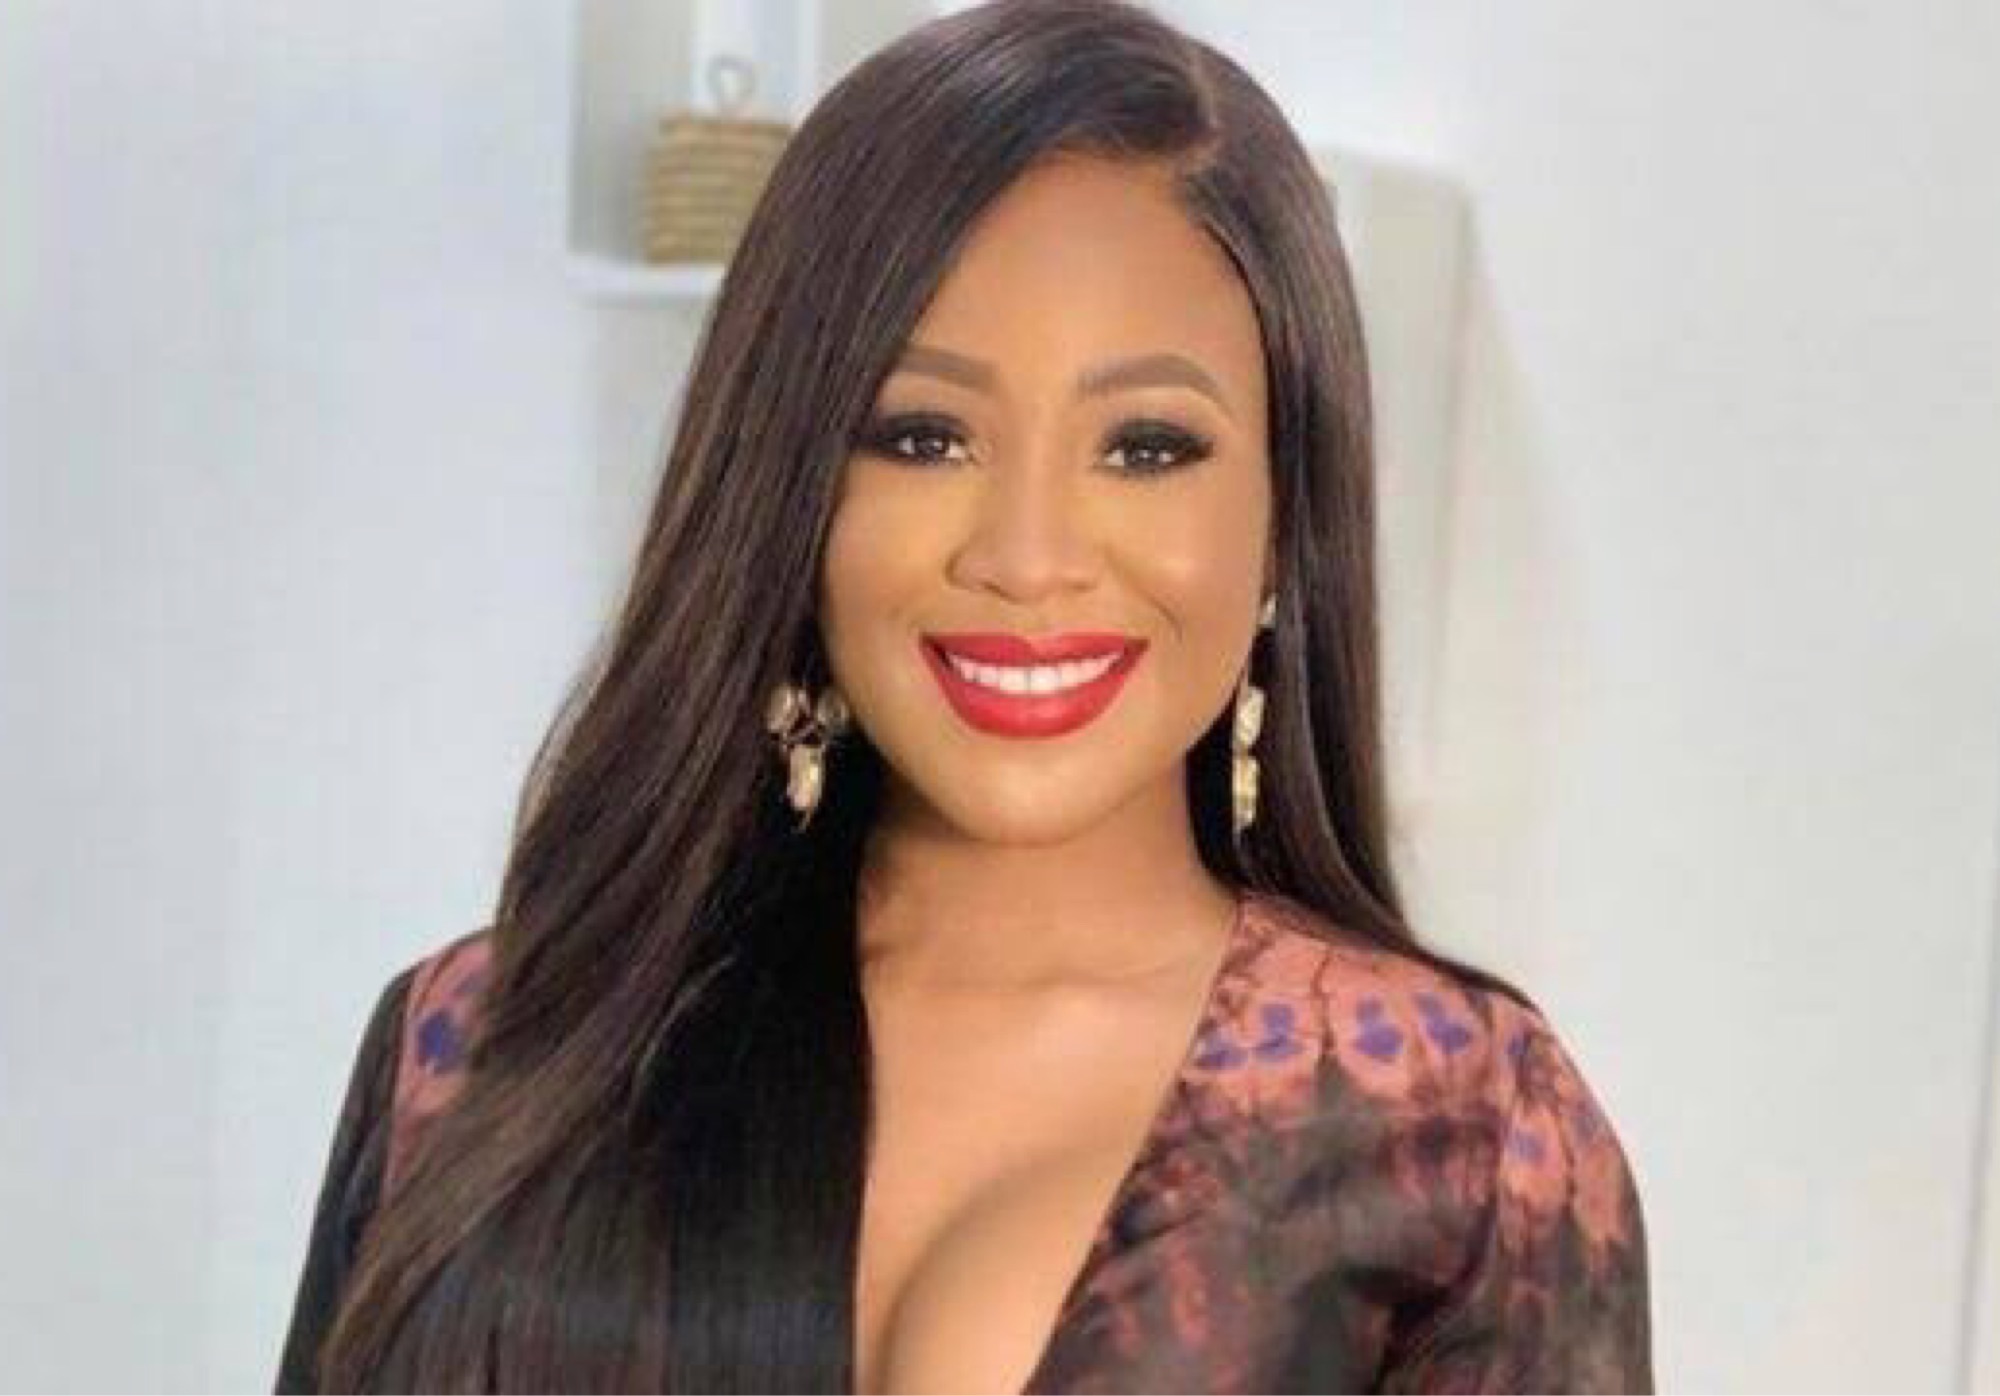 'I Pray You Have An Amazing 2021', Erica Tells Fans